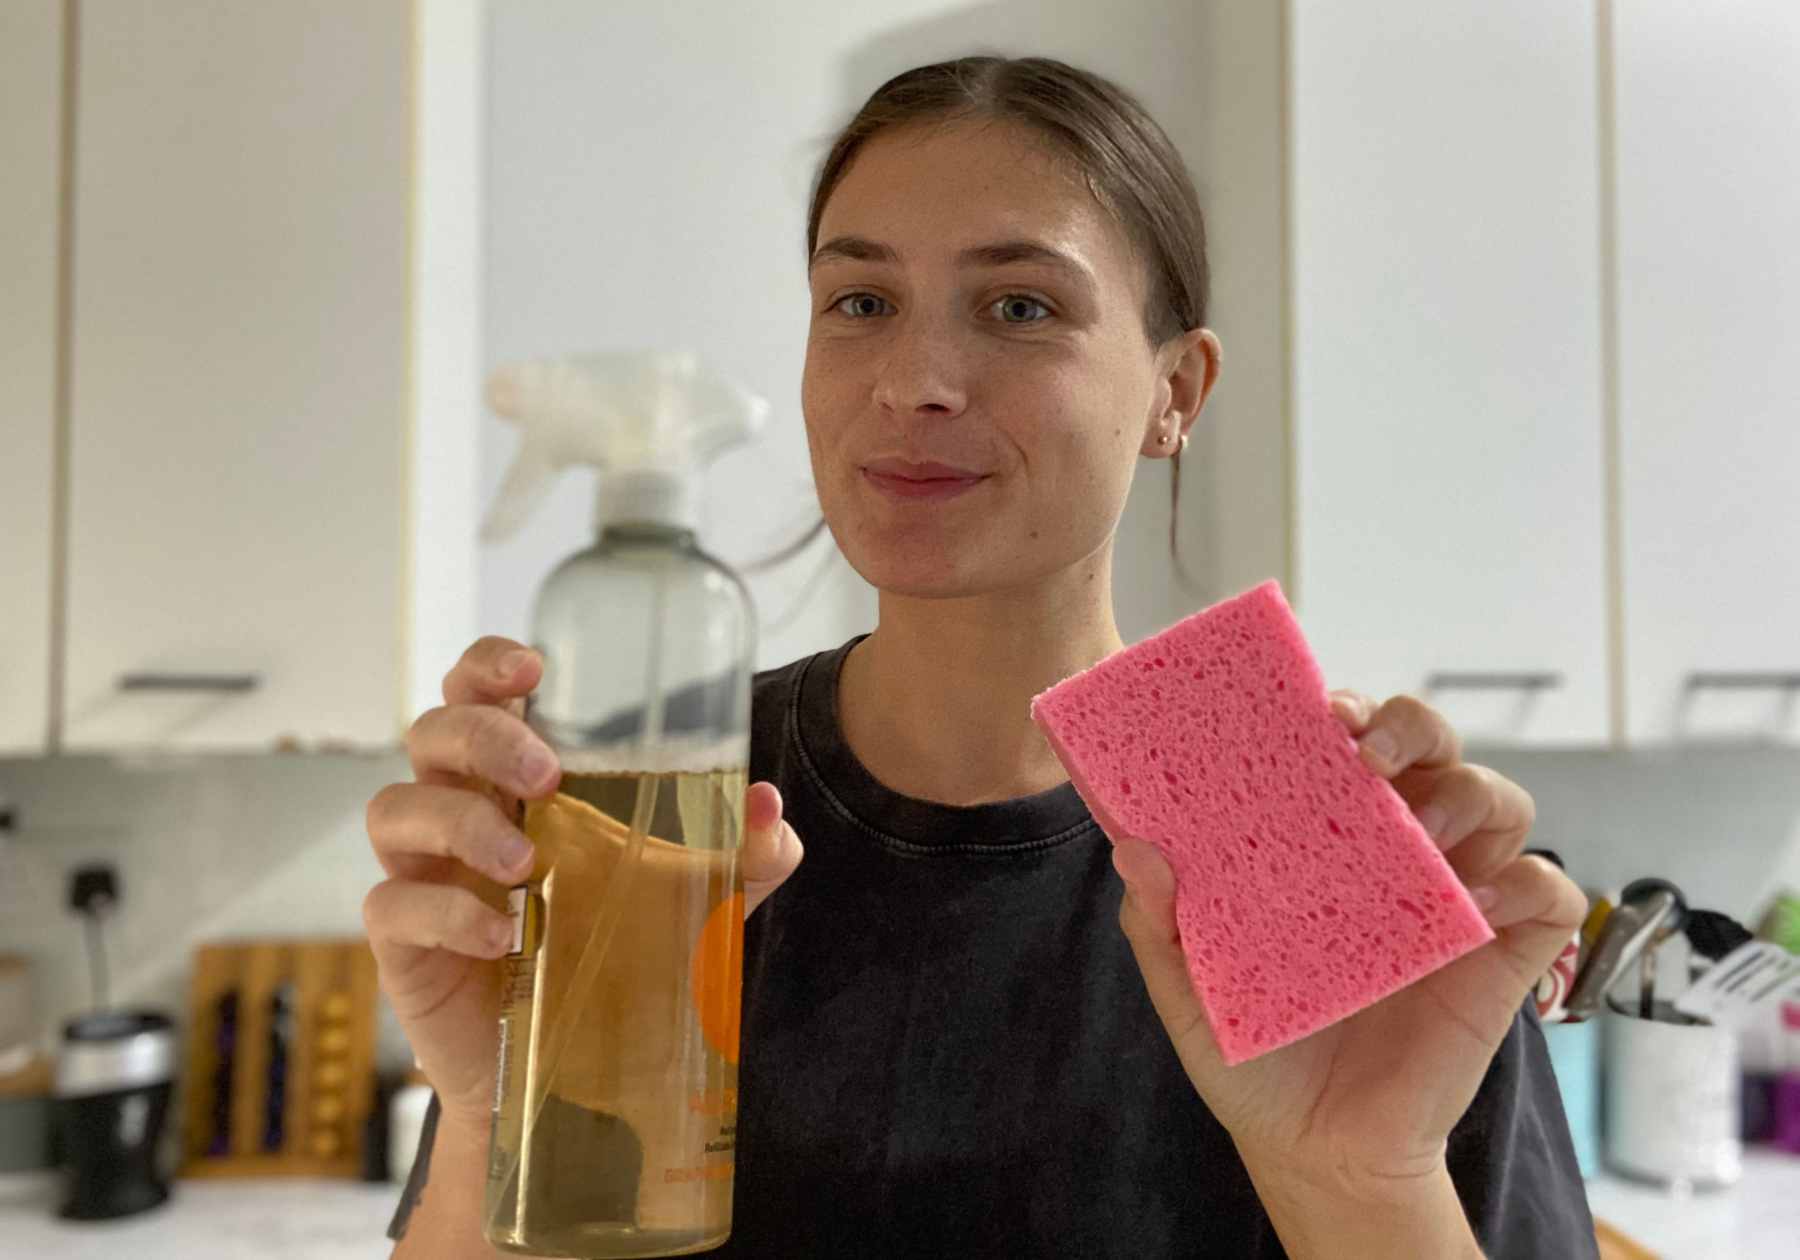 Lucy holding some vegan cleaning products up towards the camera